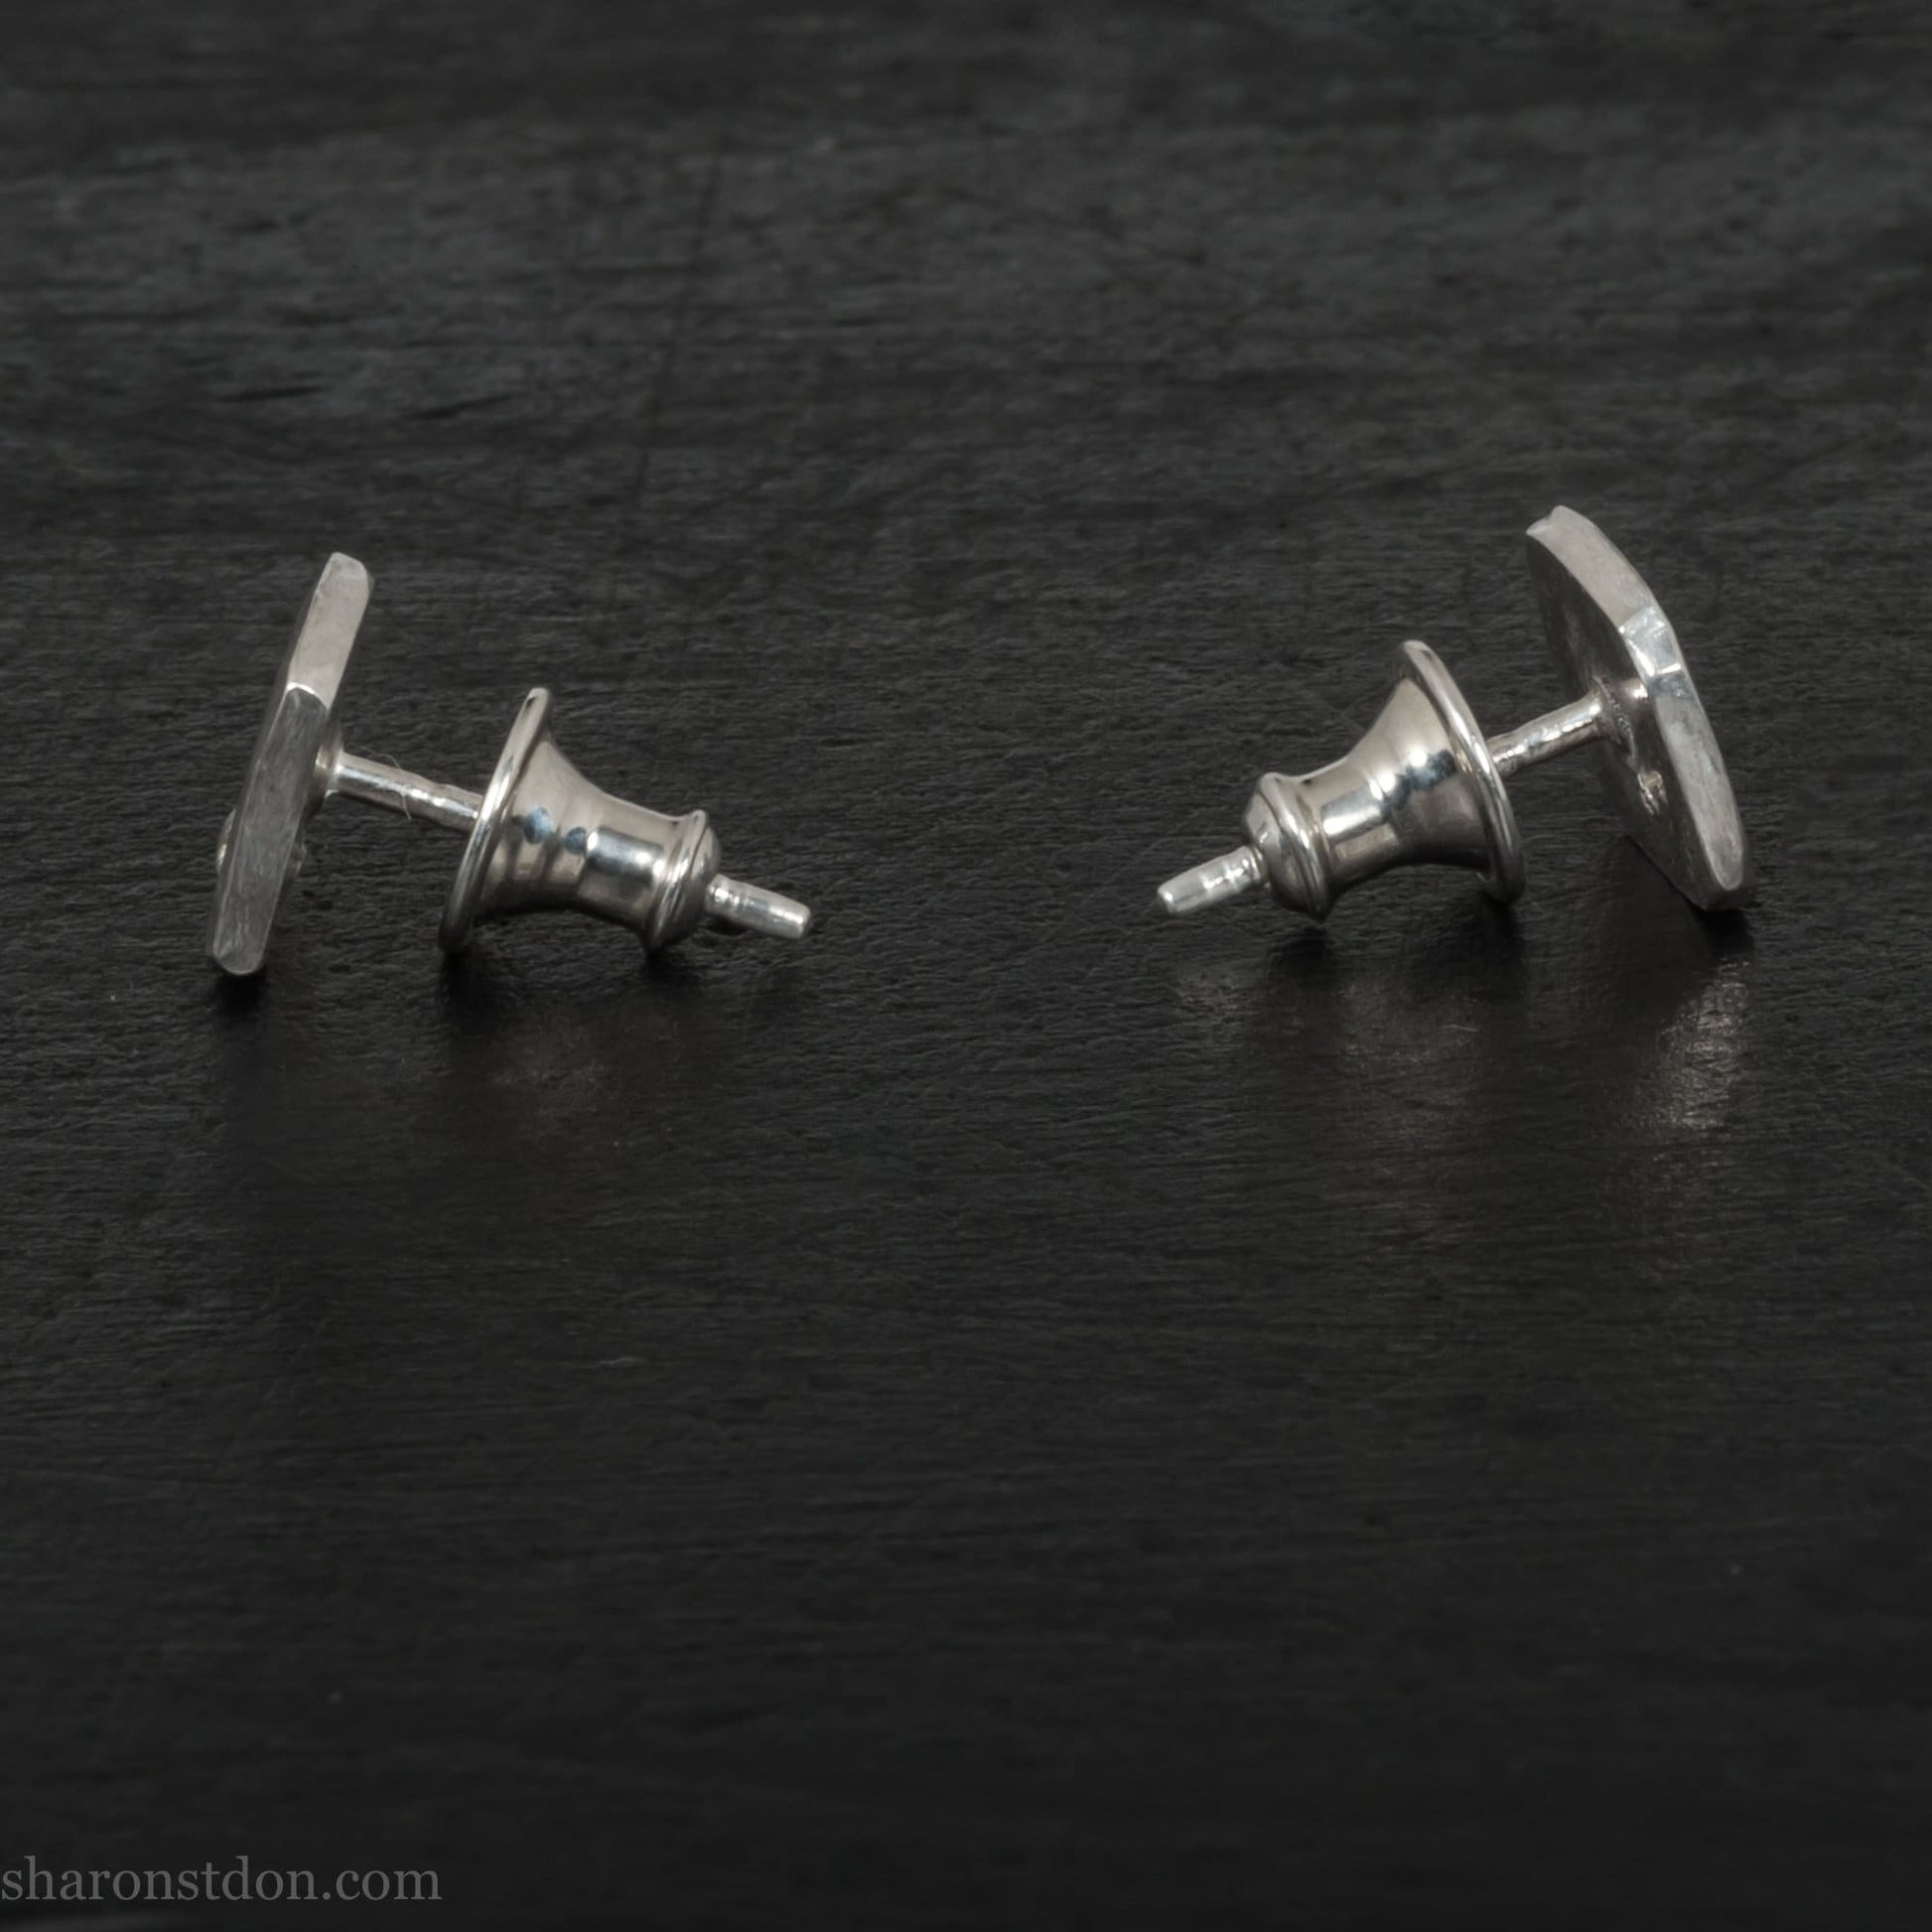 Imitation diamond stud earrings for men or women | Small 7mm squares, 925 sterling silver, matte brushed finish | Handmade unique gift